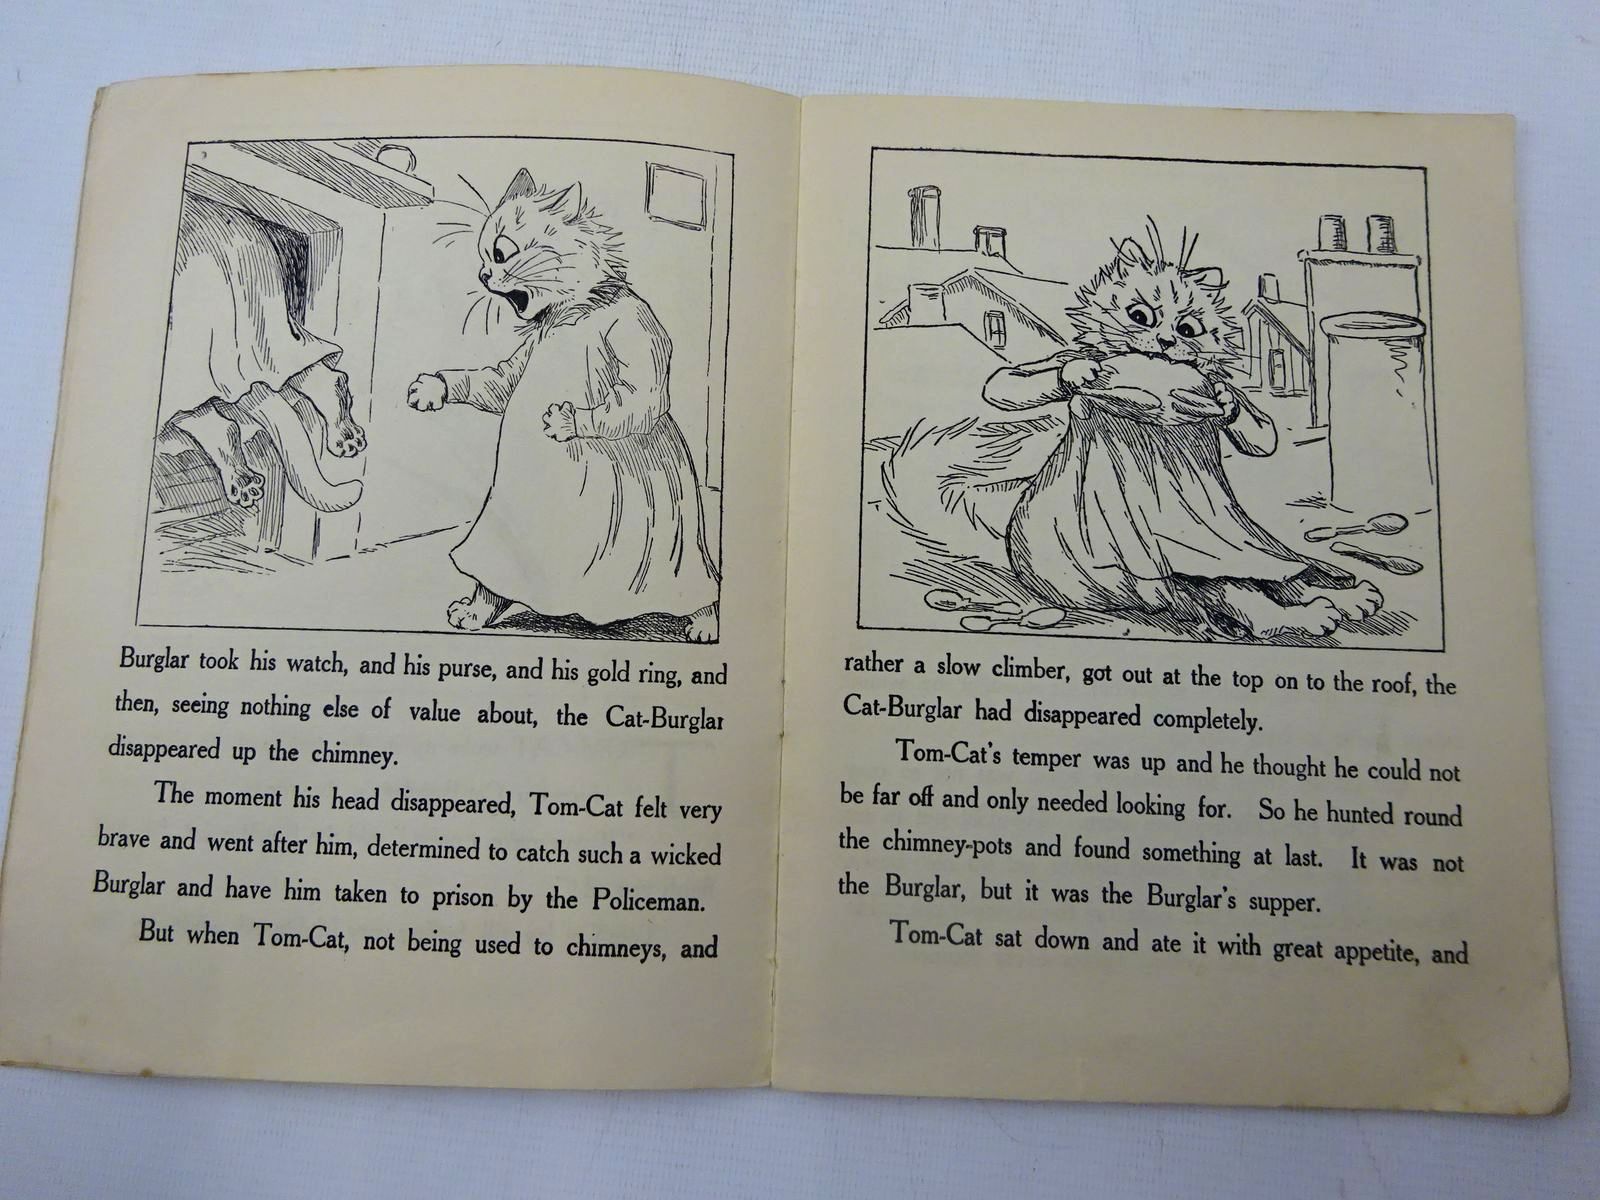 Photo of CATS AND KITTENS written by Mackintosh, Mabel illustrated by Wain, Louis published by John F. Shaw & Co Ltd. (STOCK CODE: 2128233)  for sale by Stella & Rose's Books